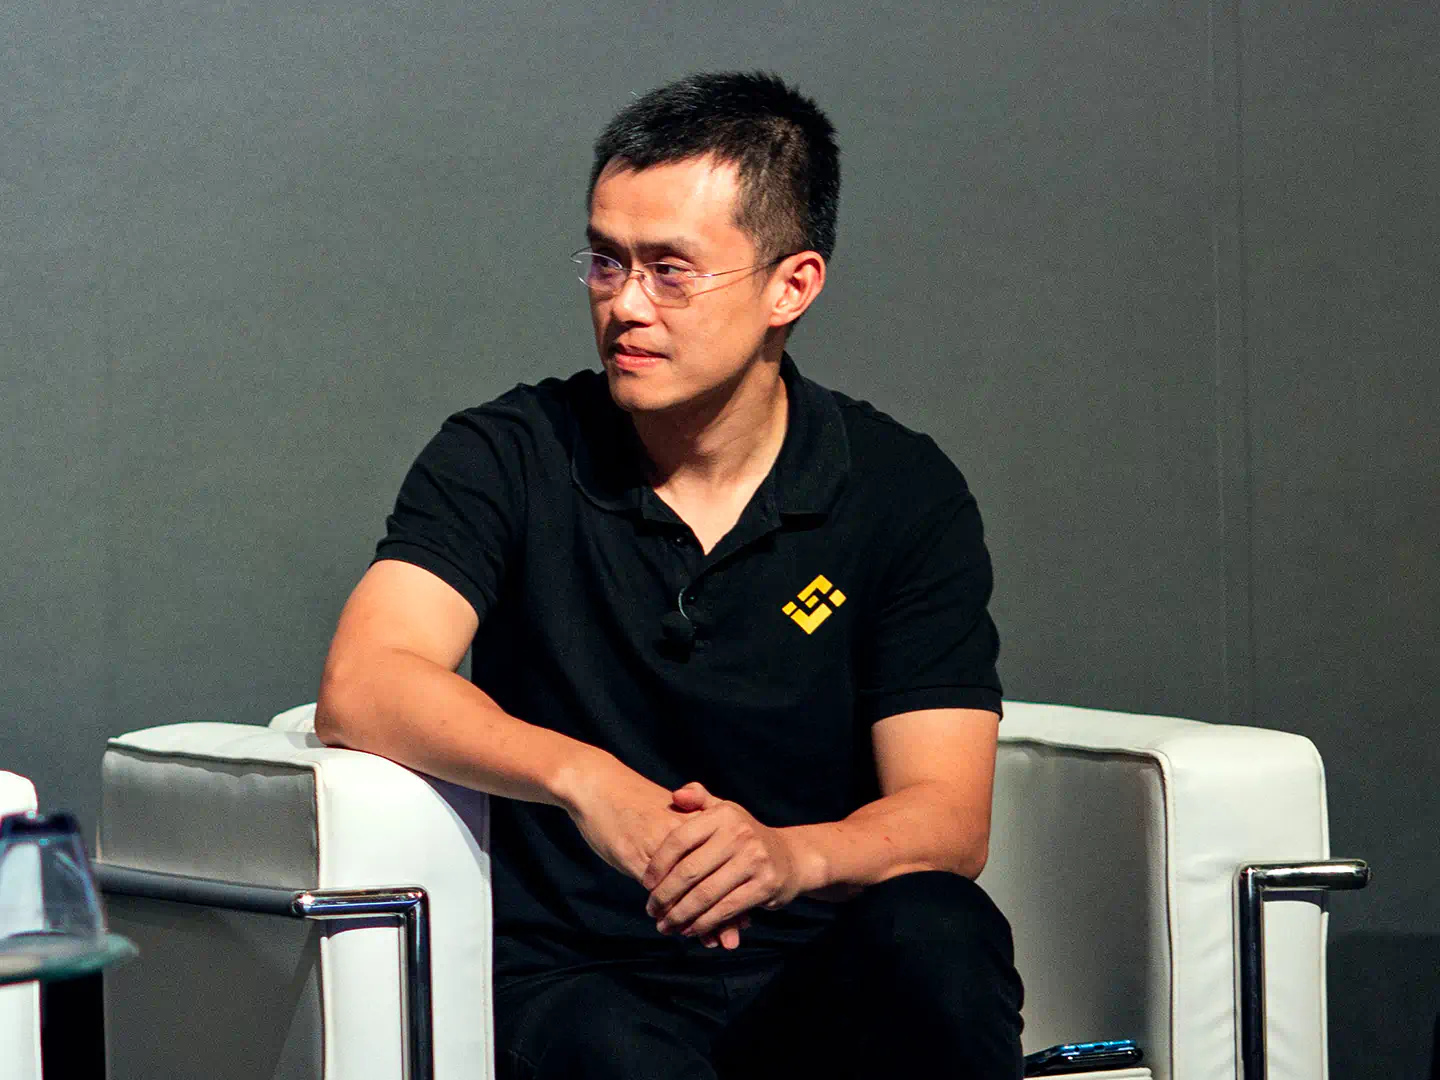 Panic Grips WazirX Users After Binance's CEO Advises Users to Move Funds